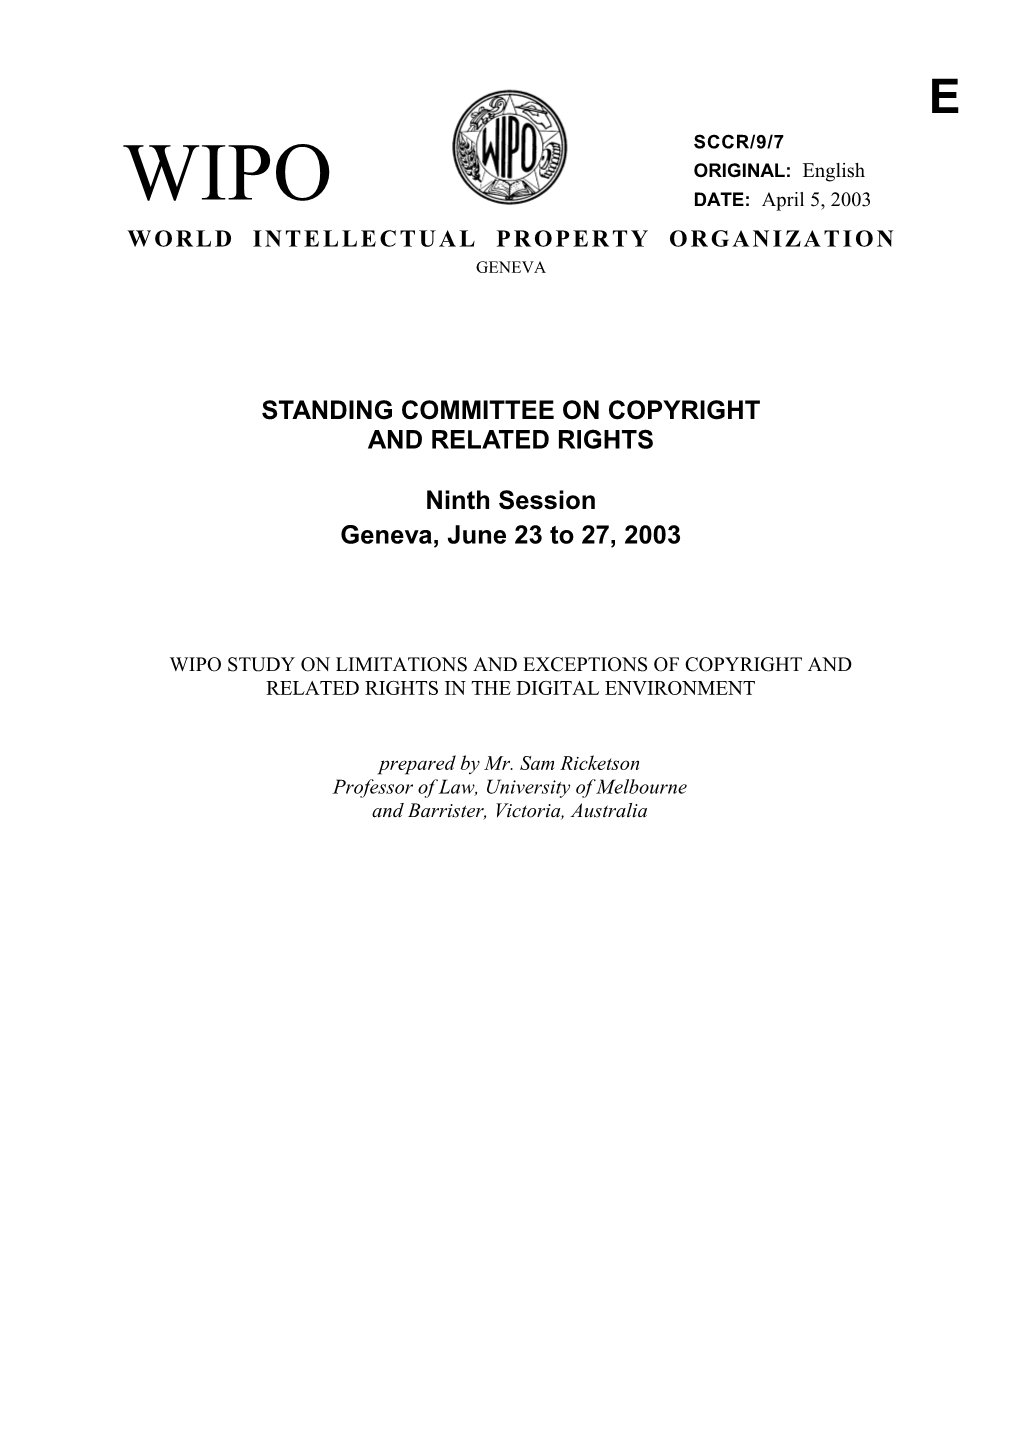 SCCR/9/7: WIPO Study on Limitations and Exceptions of Copyright and Related Rights in The